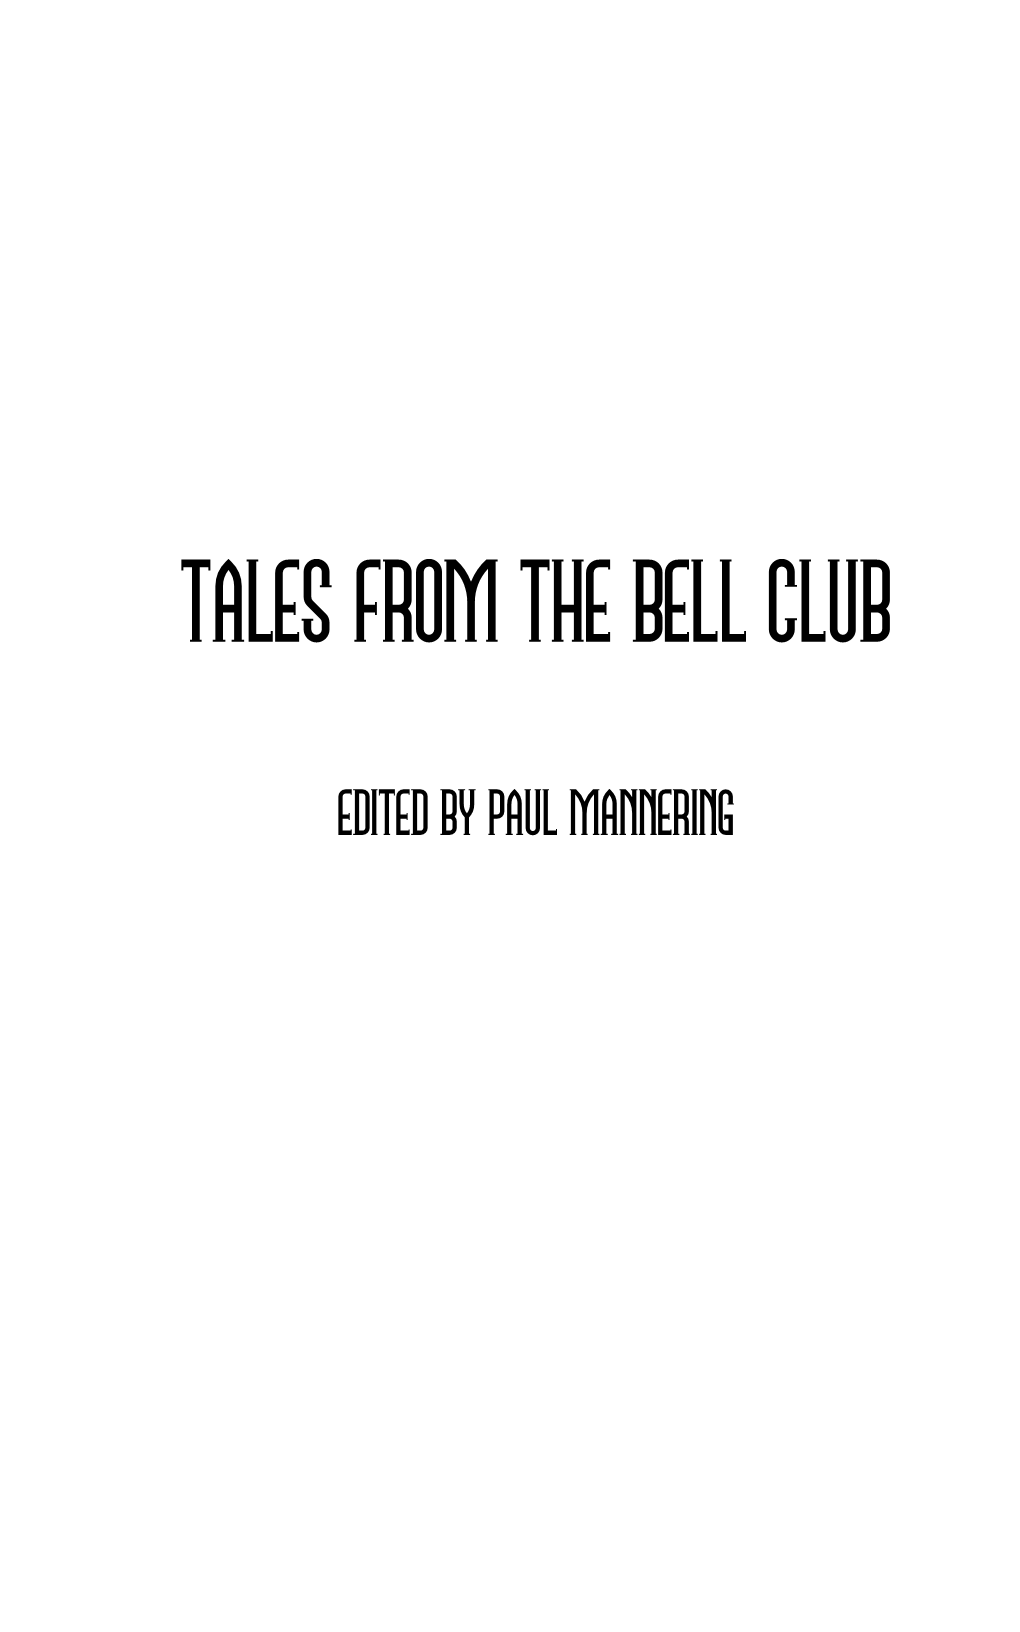 Tales from the Bell Club